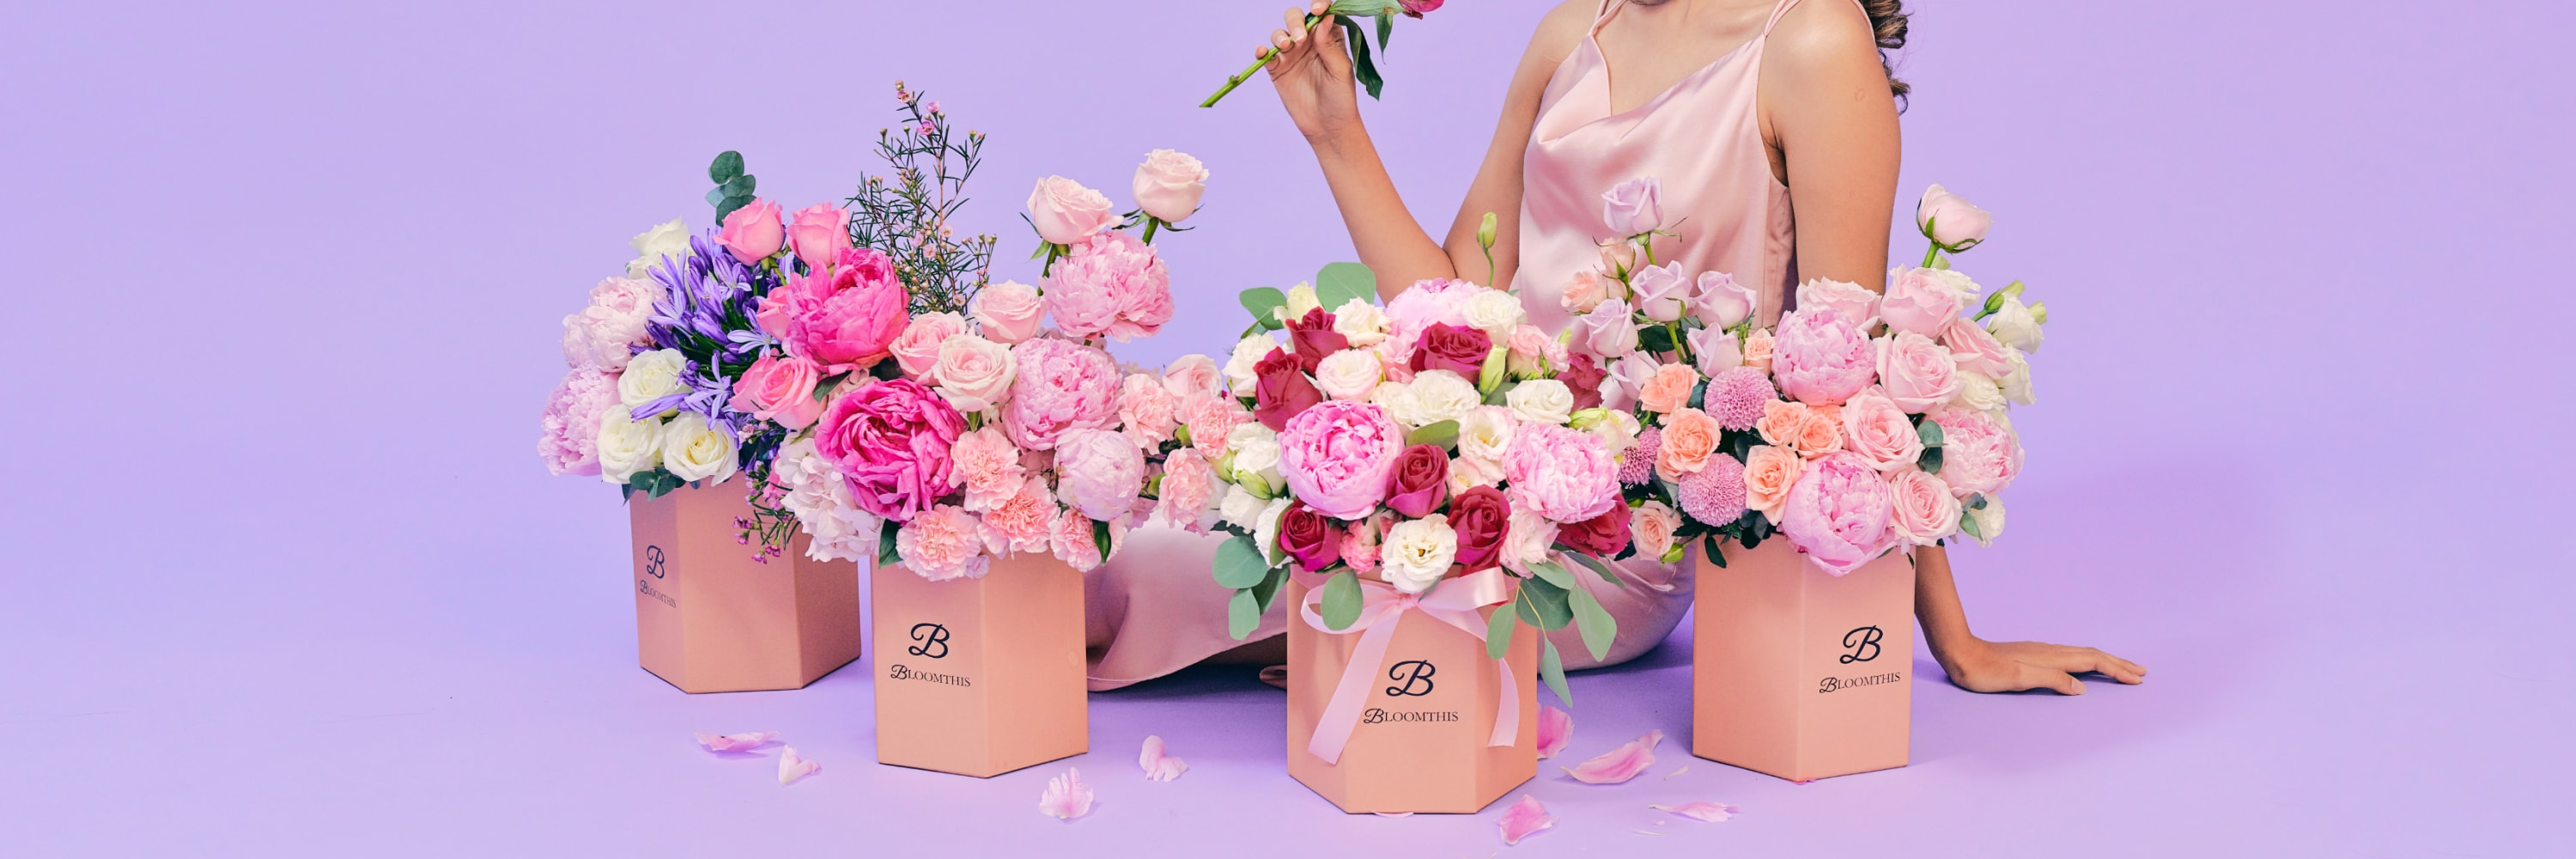 BloomThis peony flowers & bouquets